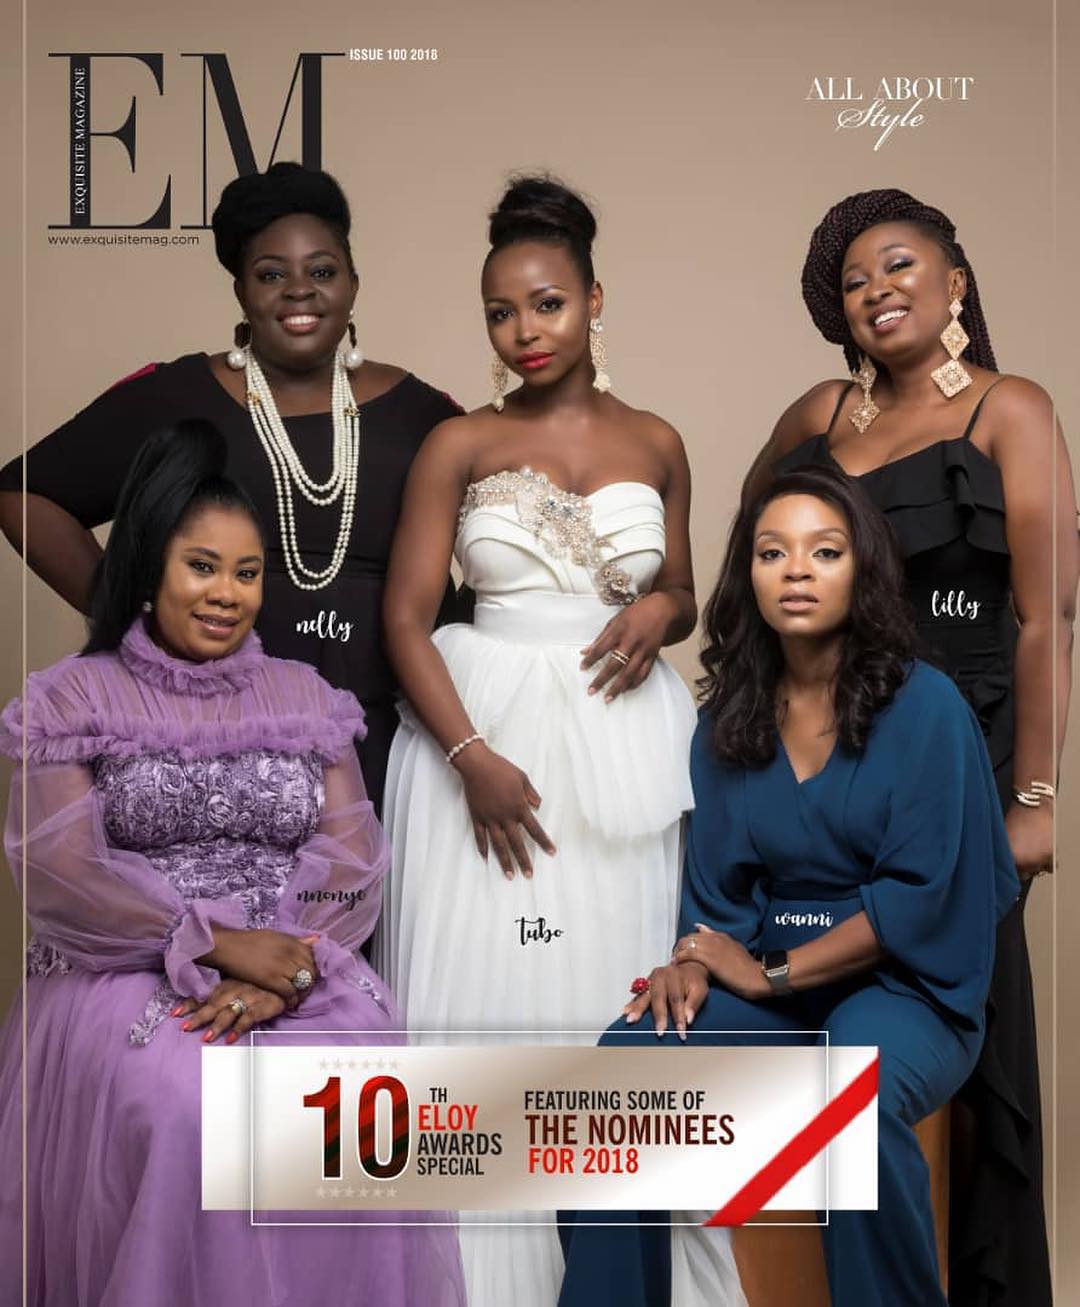 2018 ELOY Awards Nominees Wanni Wabara, Tubo, Nelly, Nonye & Lilly cover Exquisite Magazine’s Latest Issue